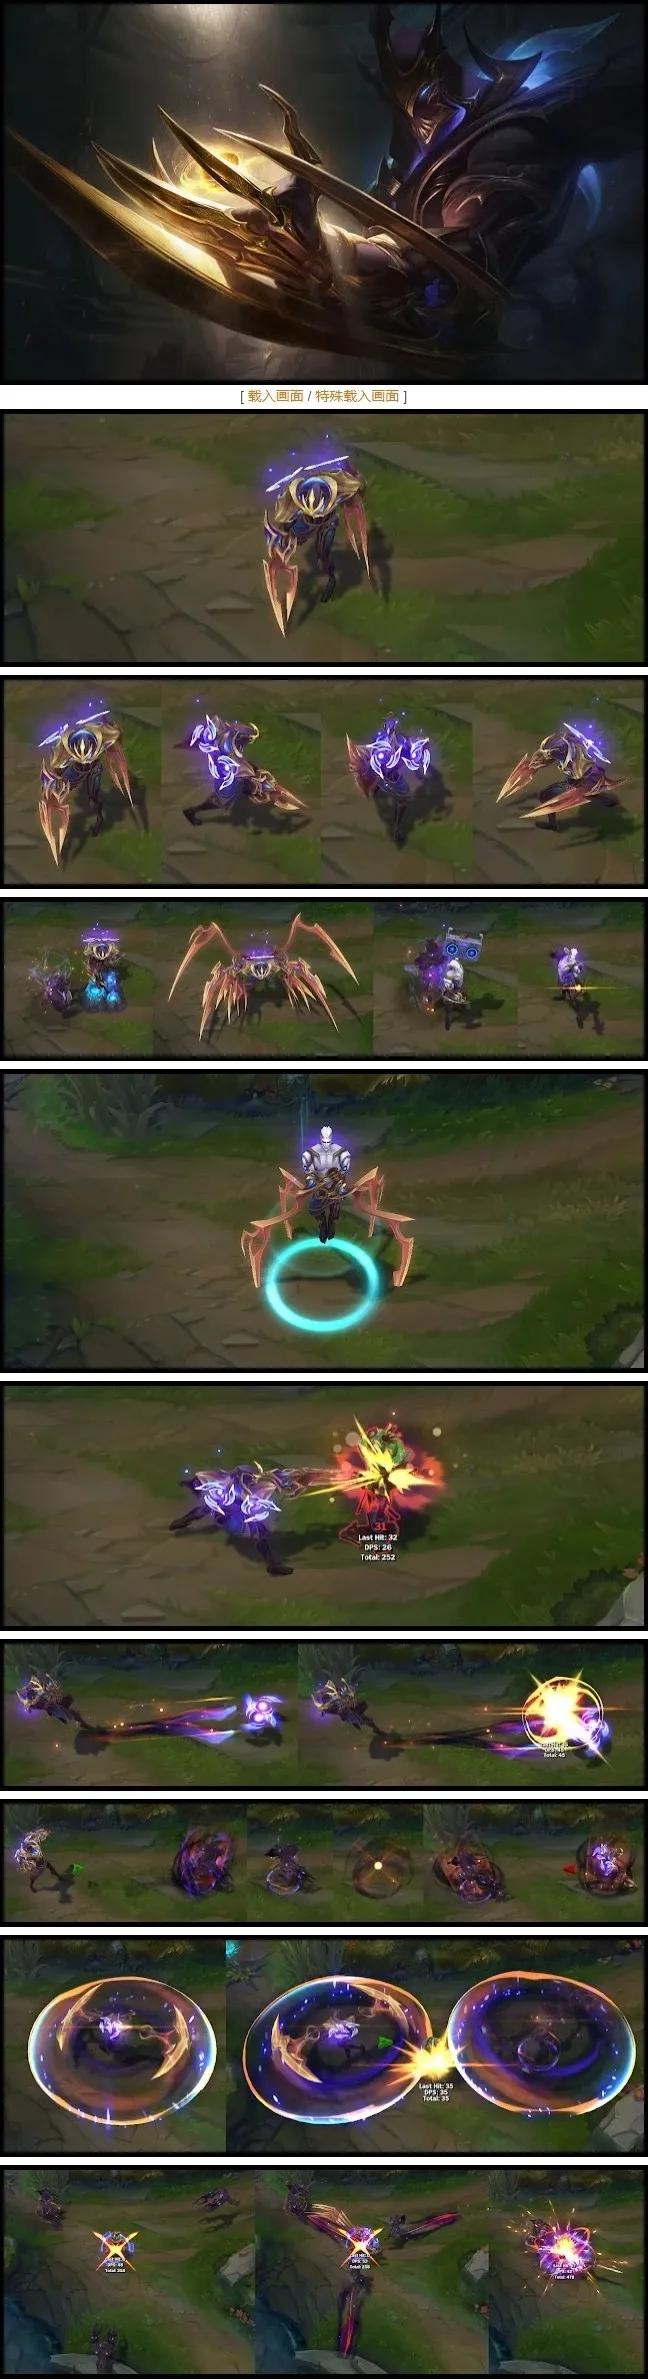 galaxy slayer zed faker reference